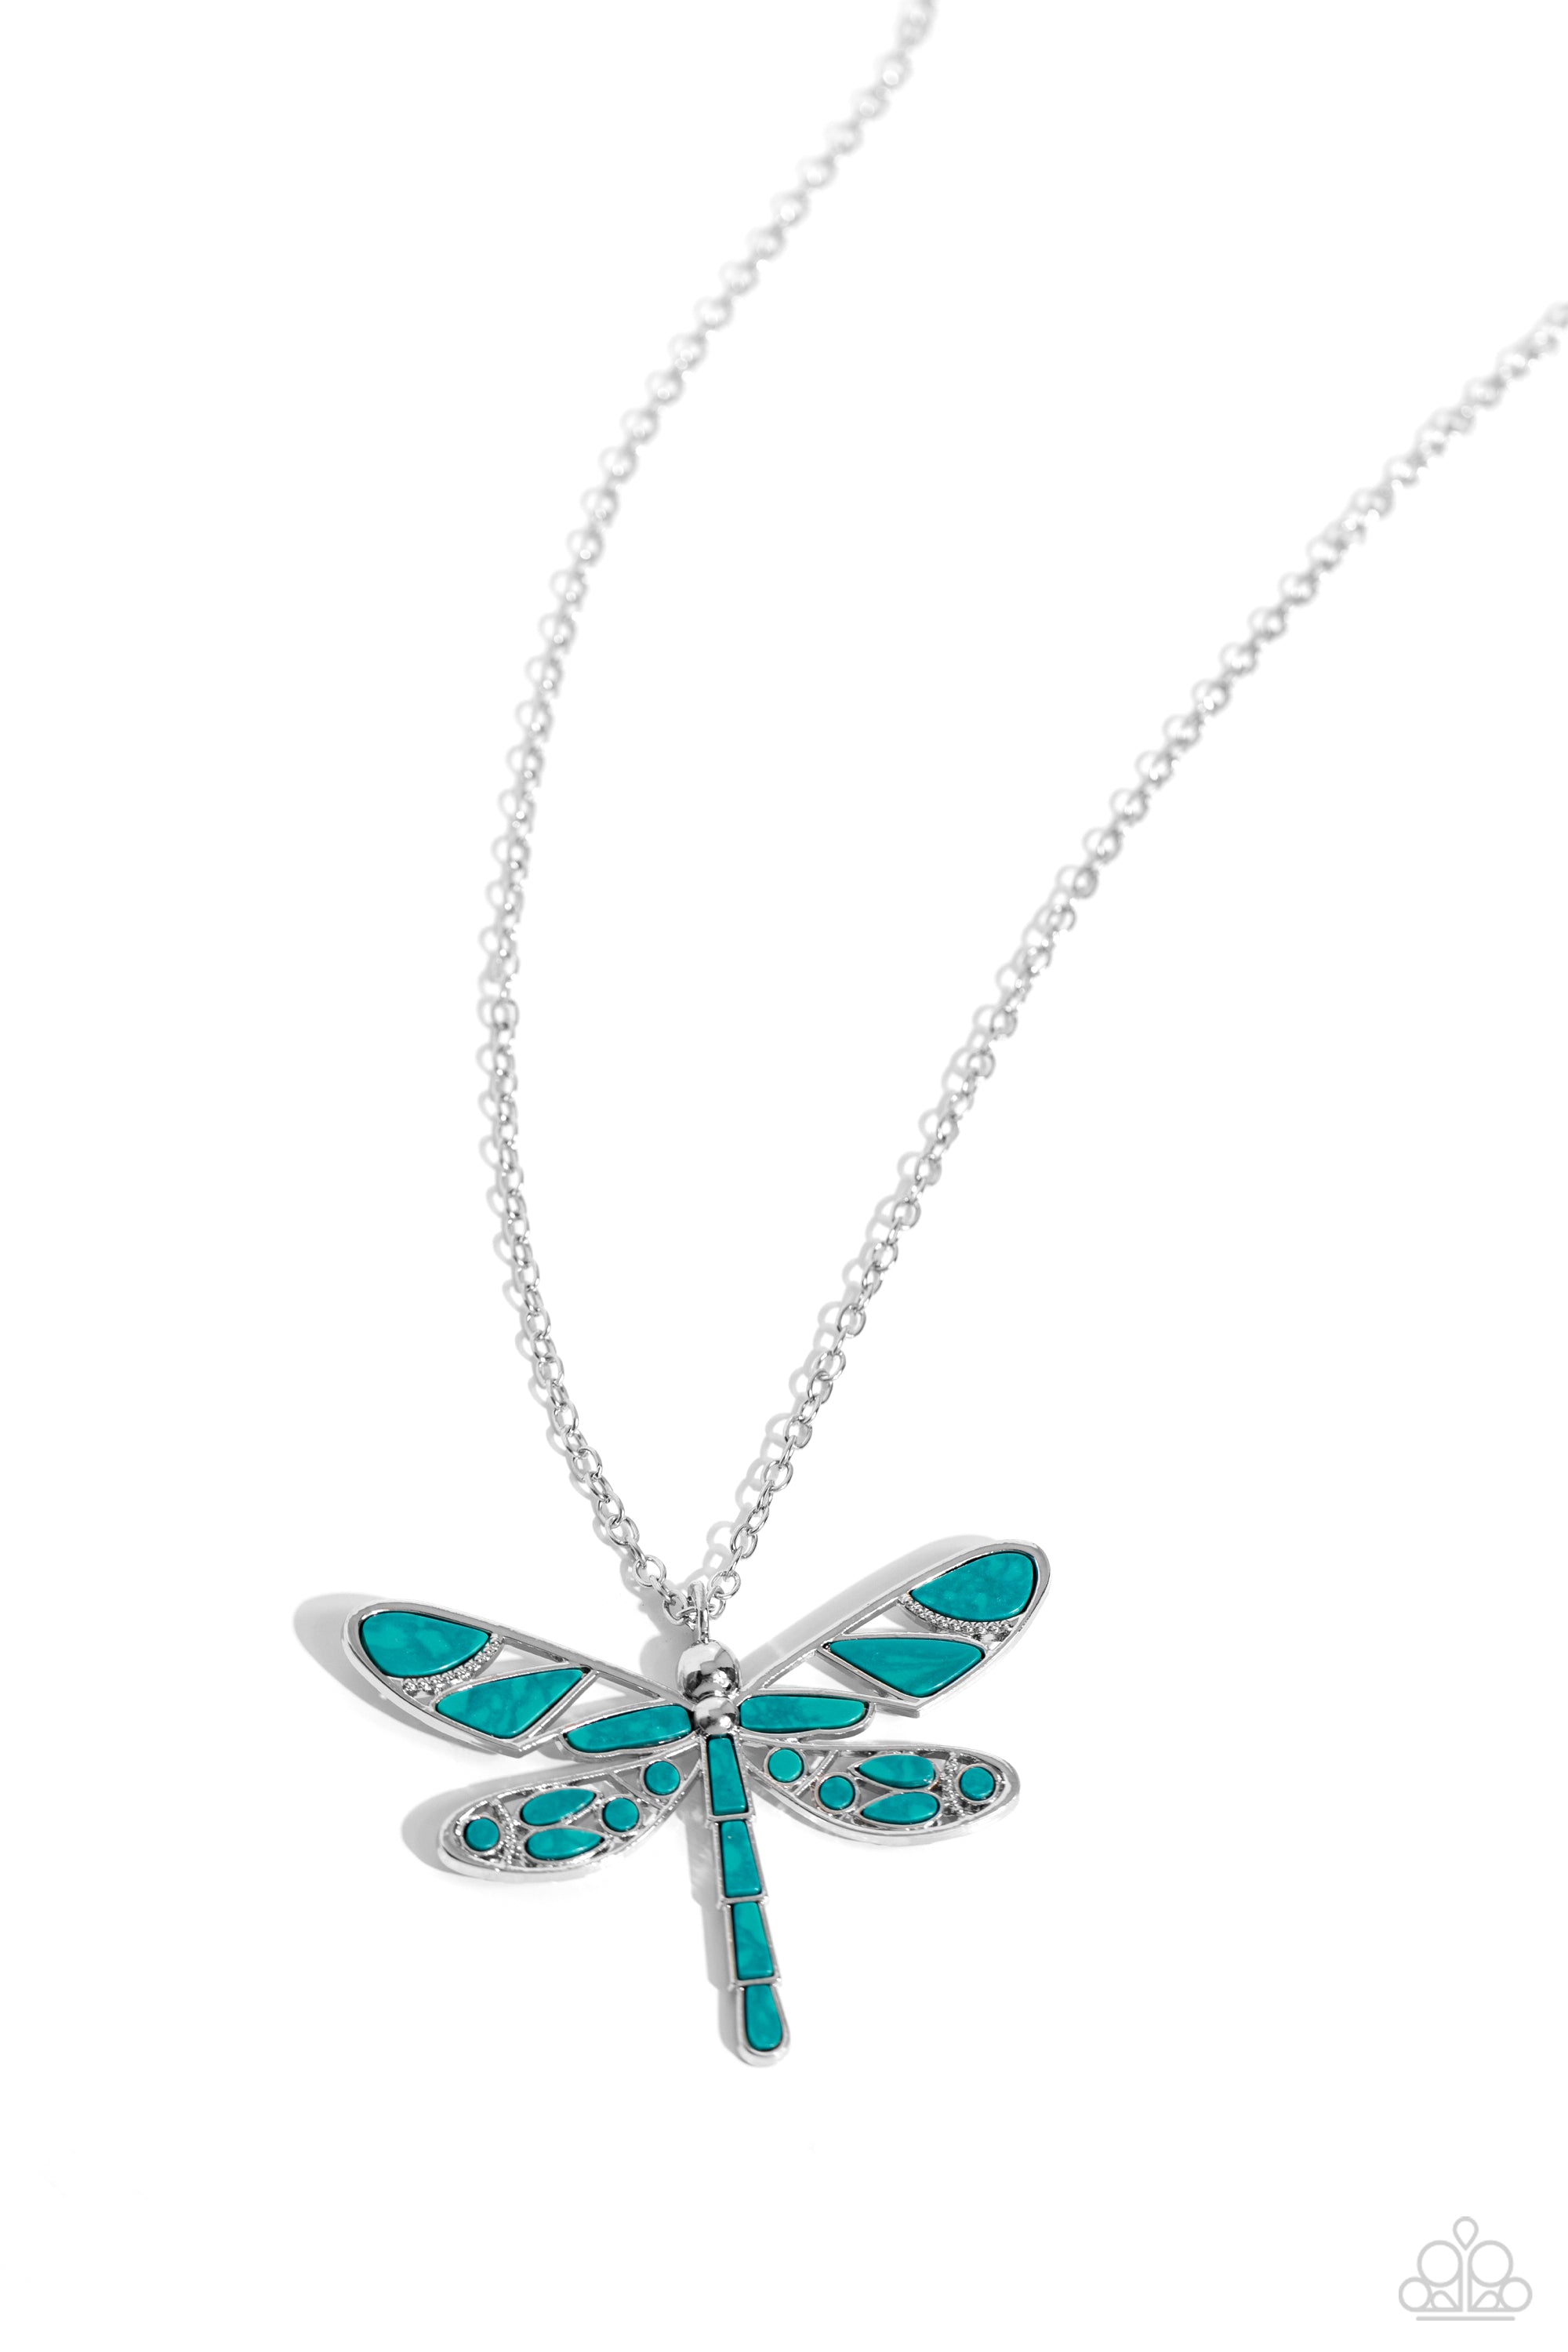 FLYING Low Teal Green Stone Dragonfly Necklace - Paparazzi Accessories- lightbox - CarasShop.com - $5 Jewelry by Cara Jewels